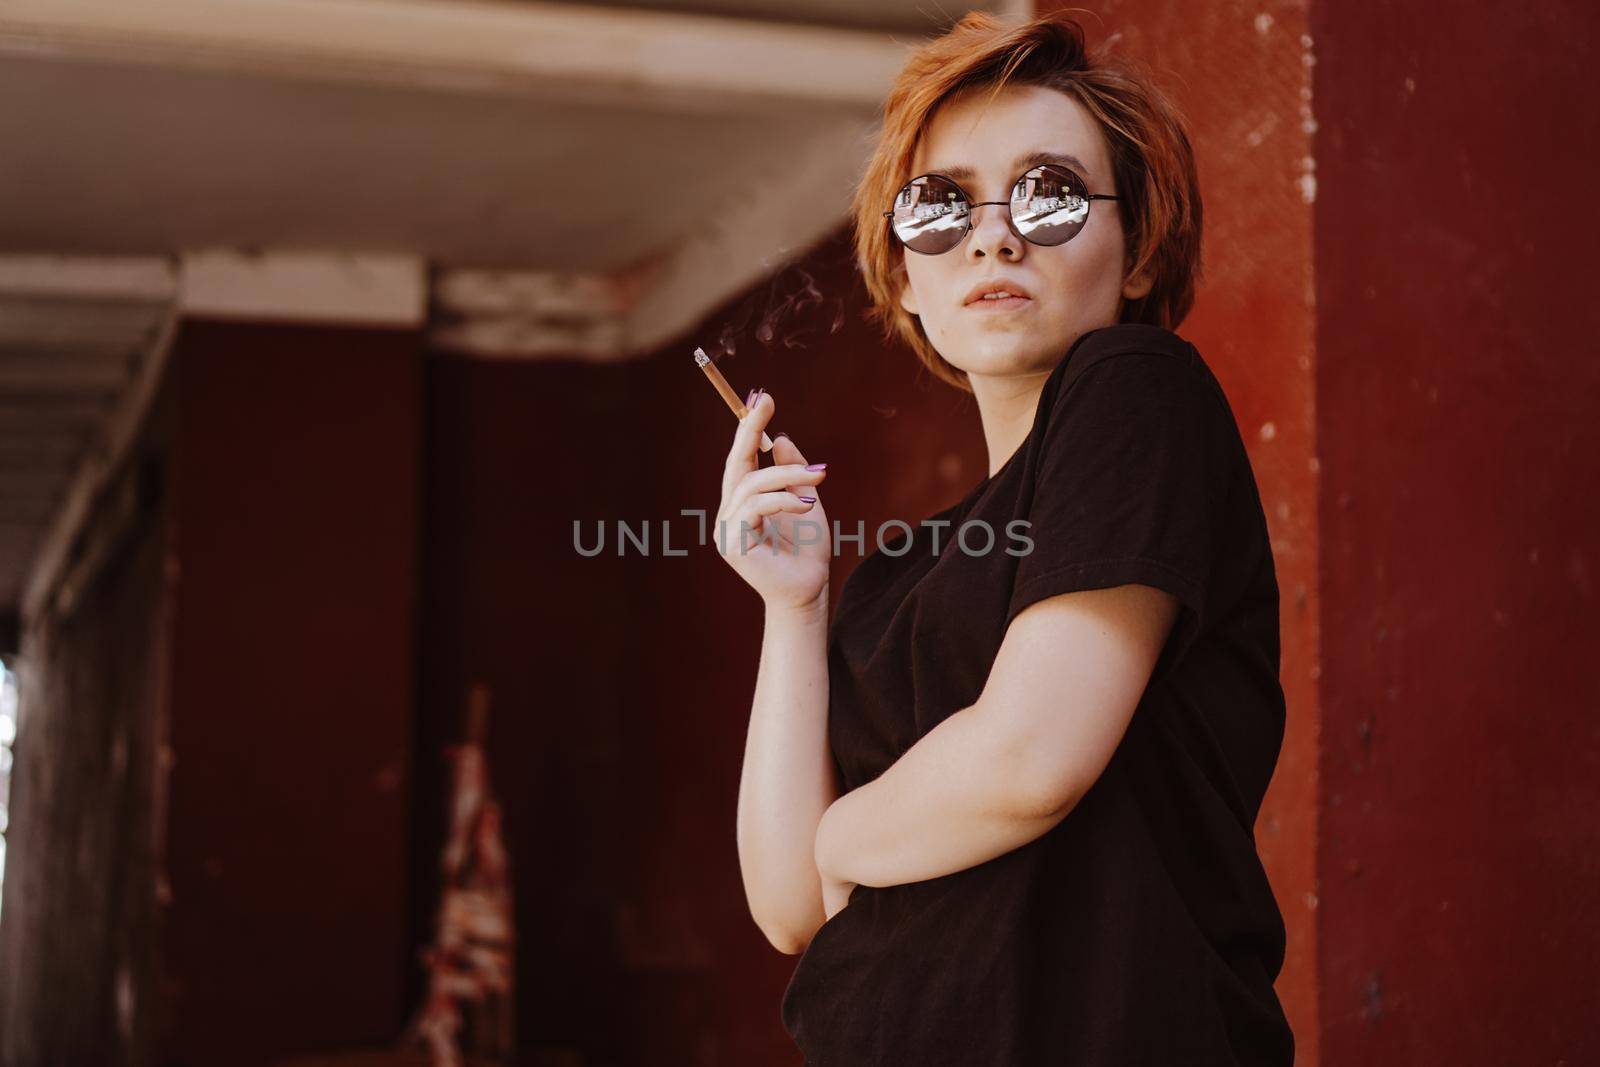 Millennial cool pretty girl with short red hair and mirror sunglasses smoking cigarette in the old city with red walls